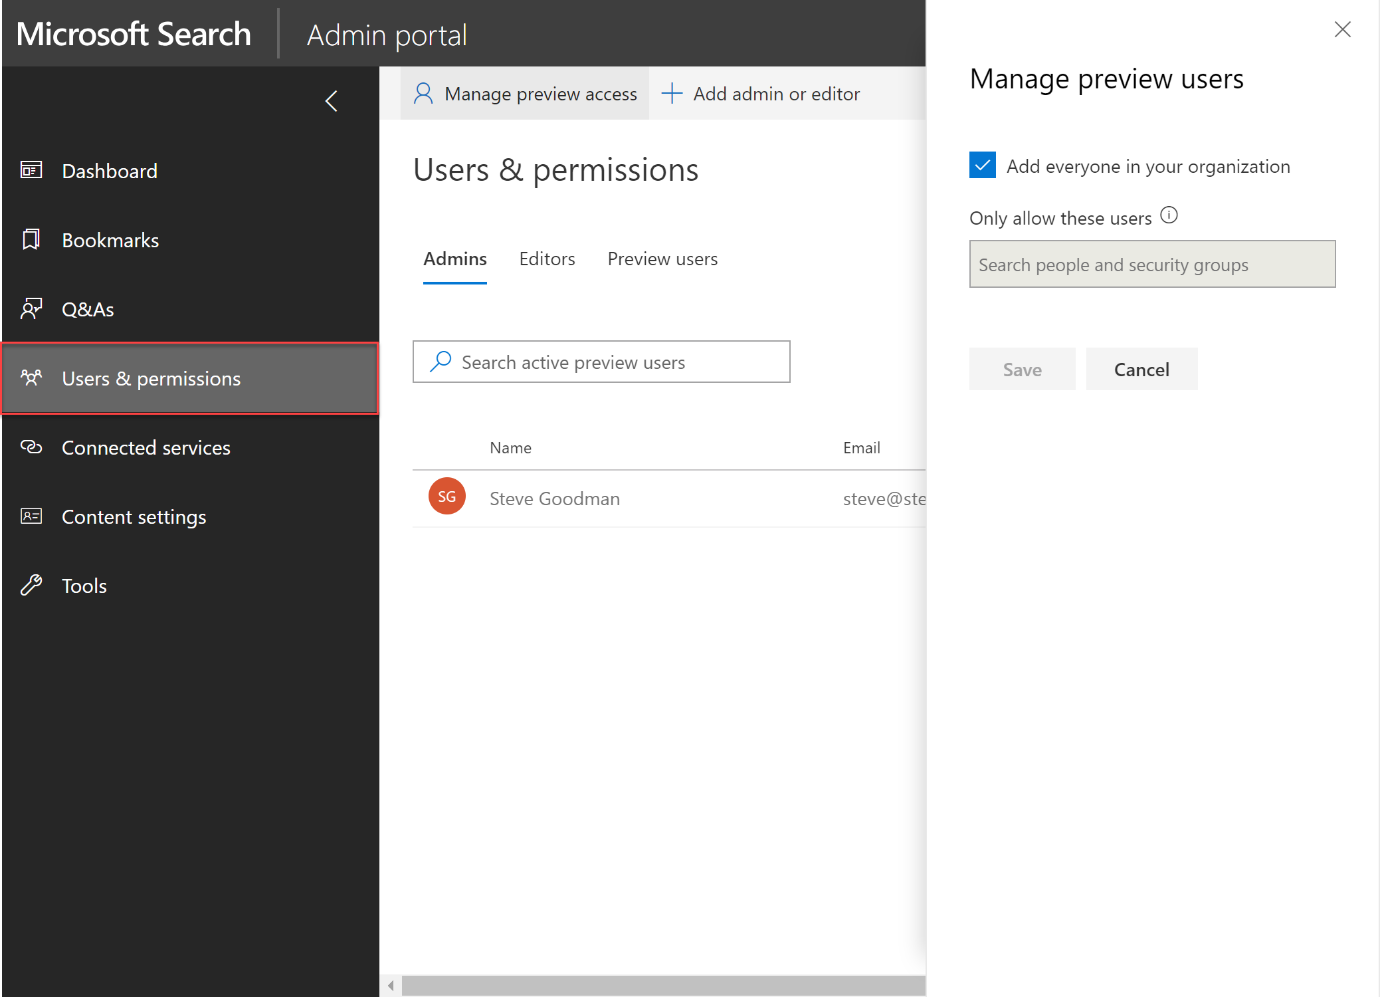 Figure 4: Selecting users and permissions